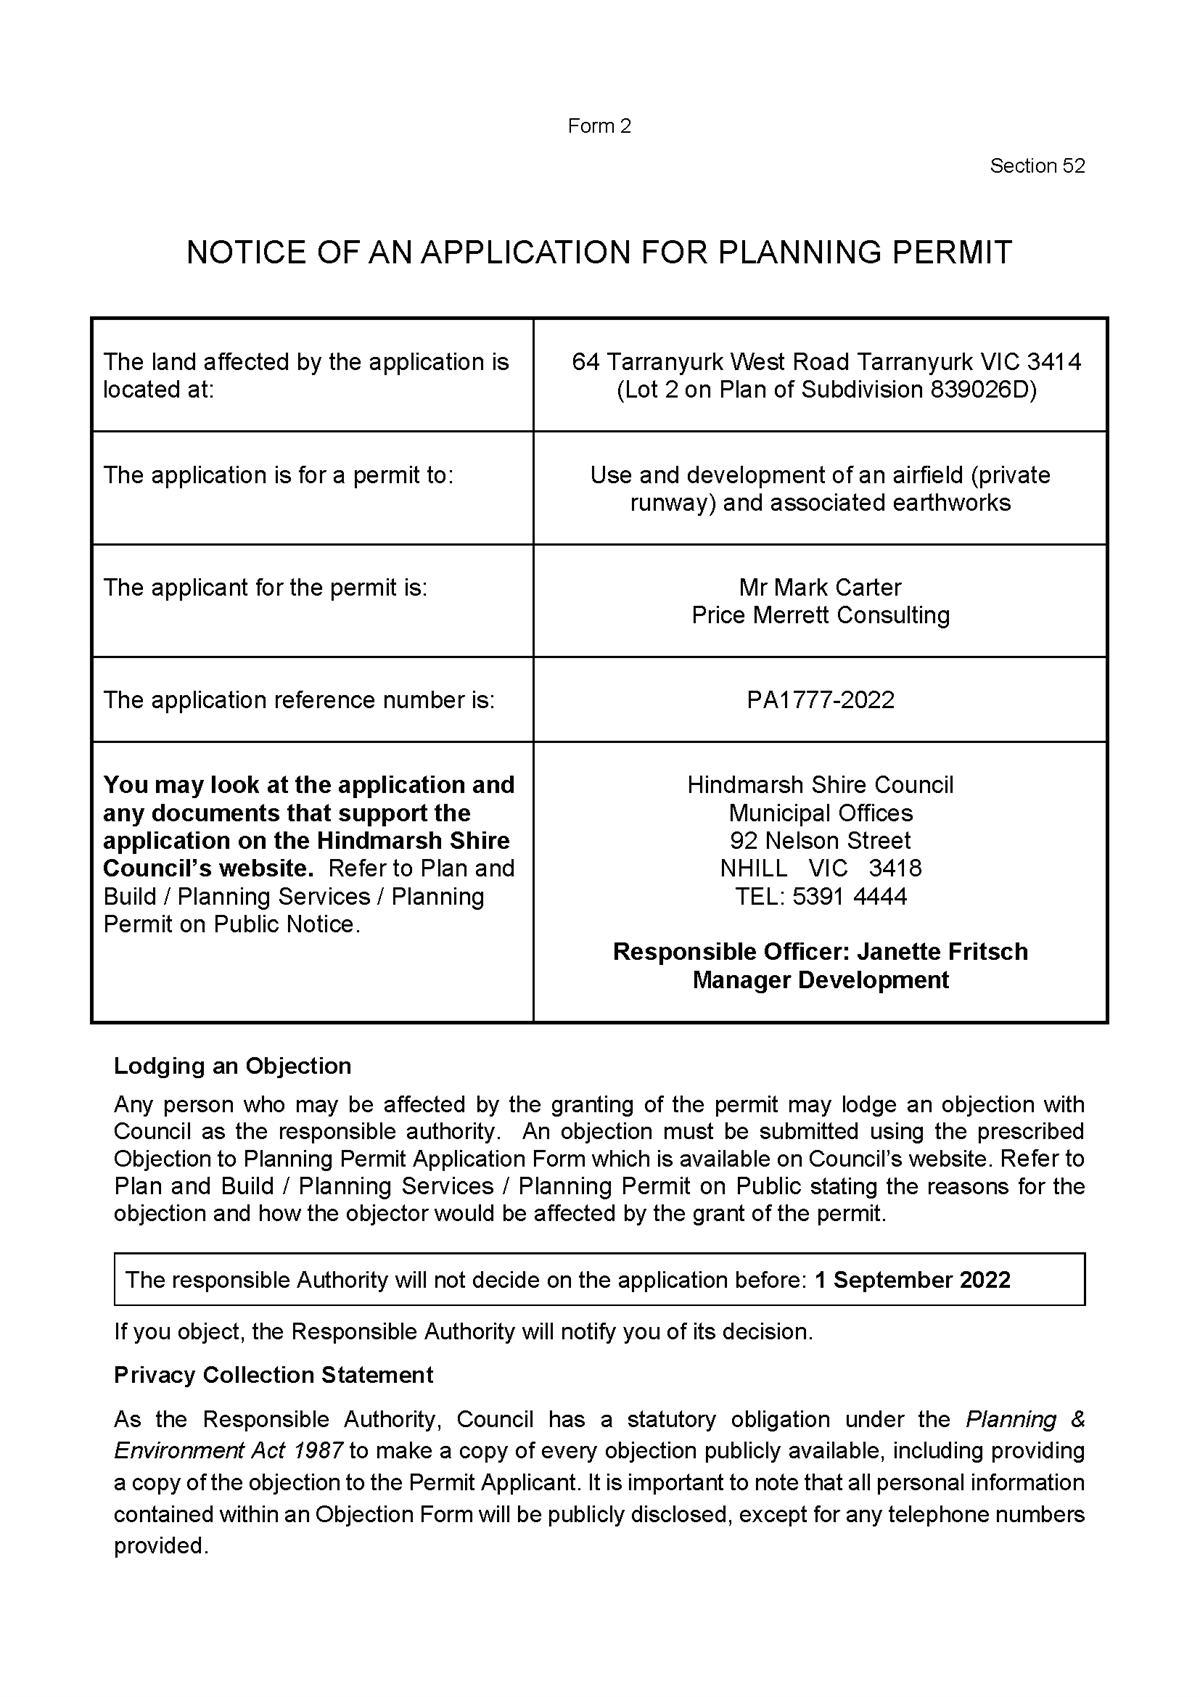 2022_08_17 and 18 - PA1777-2022 - ADVERT - Form 2.png